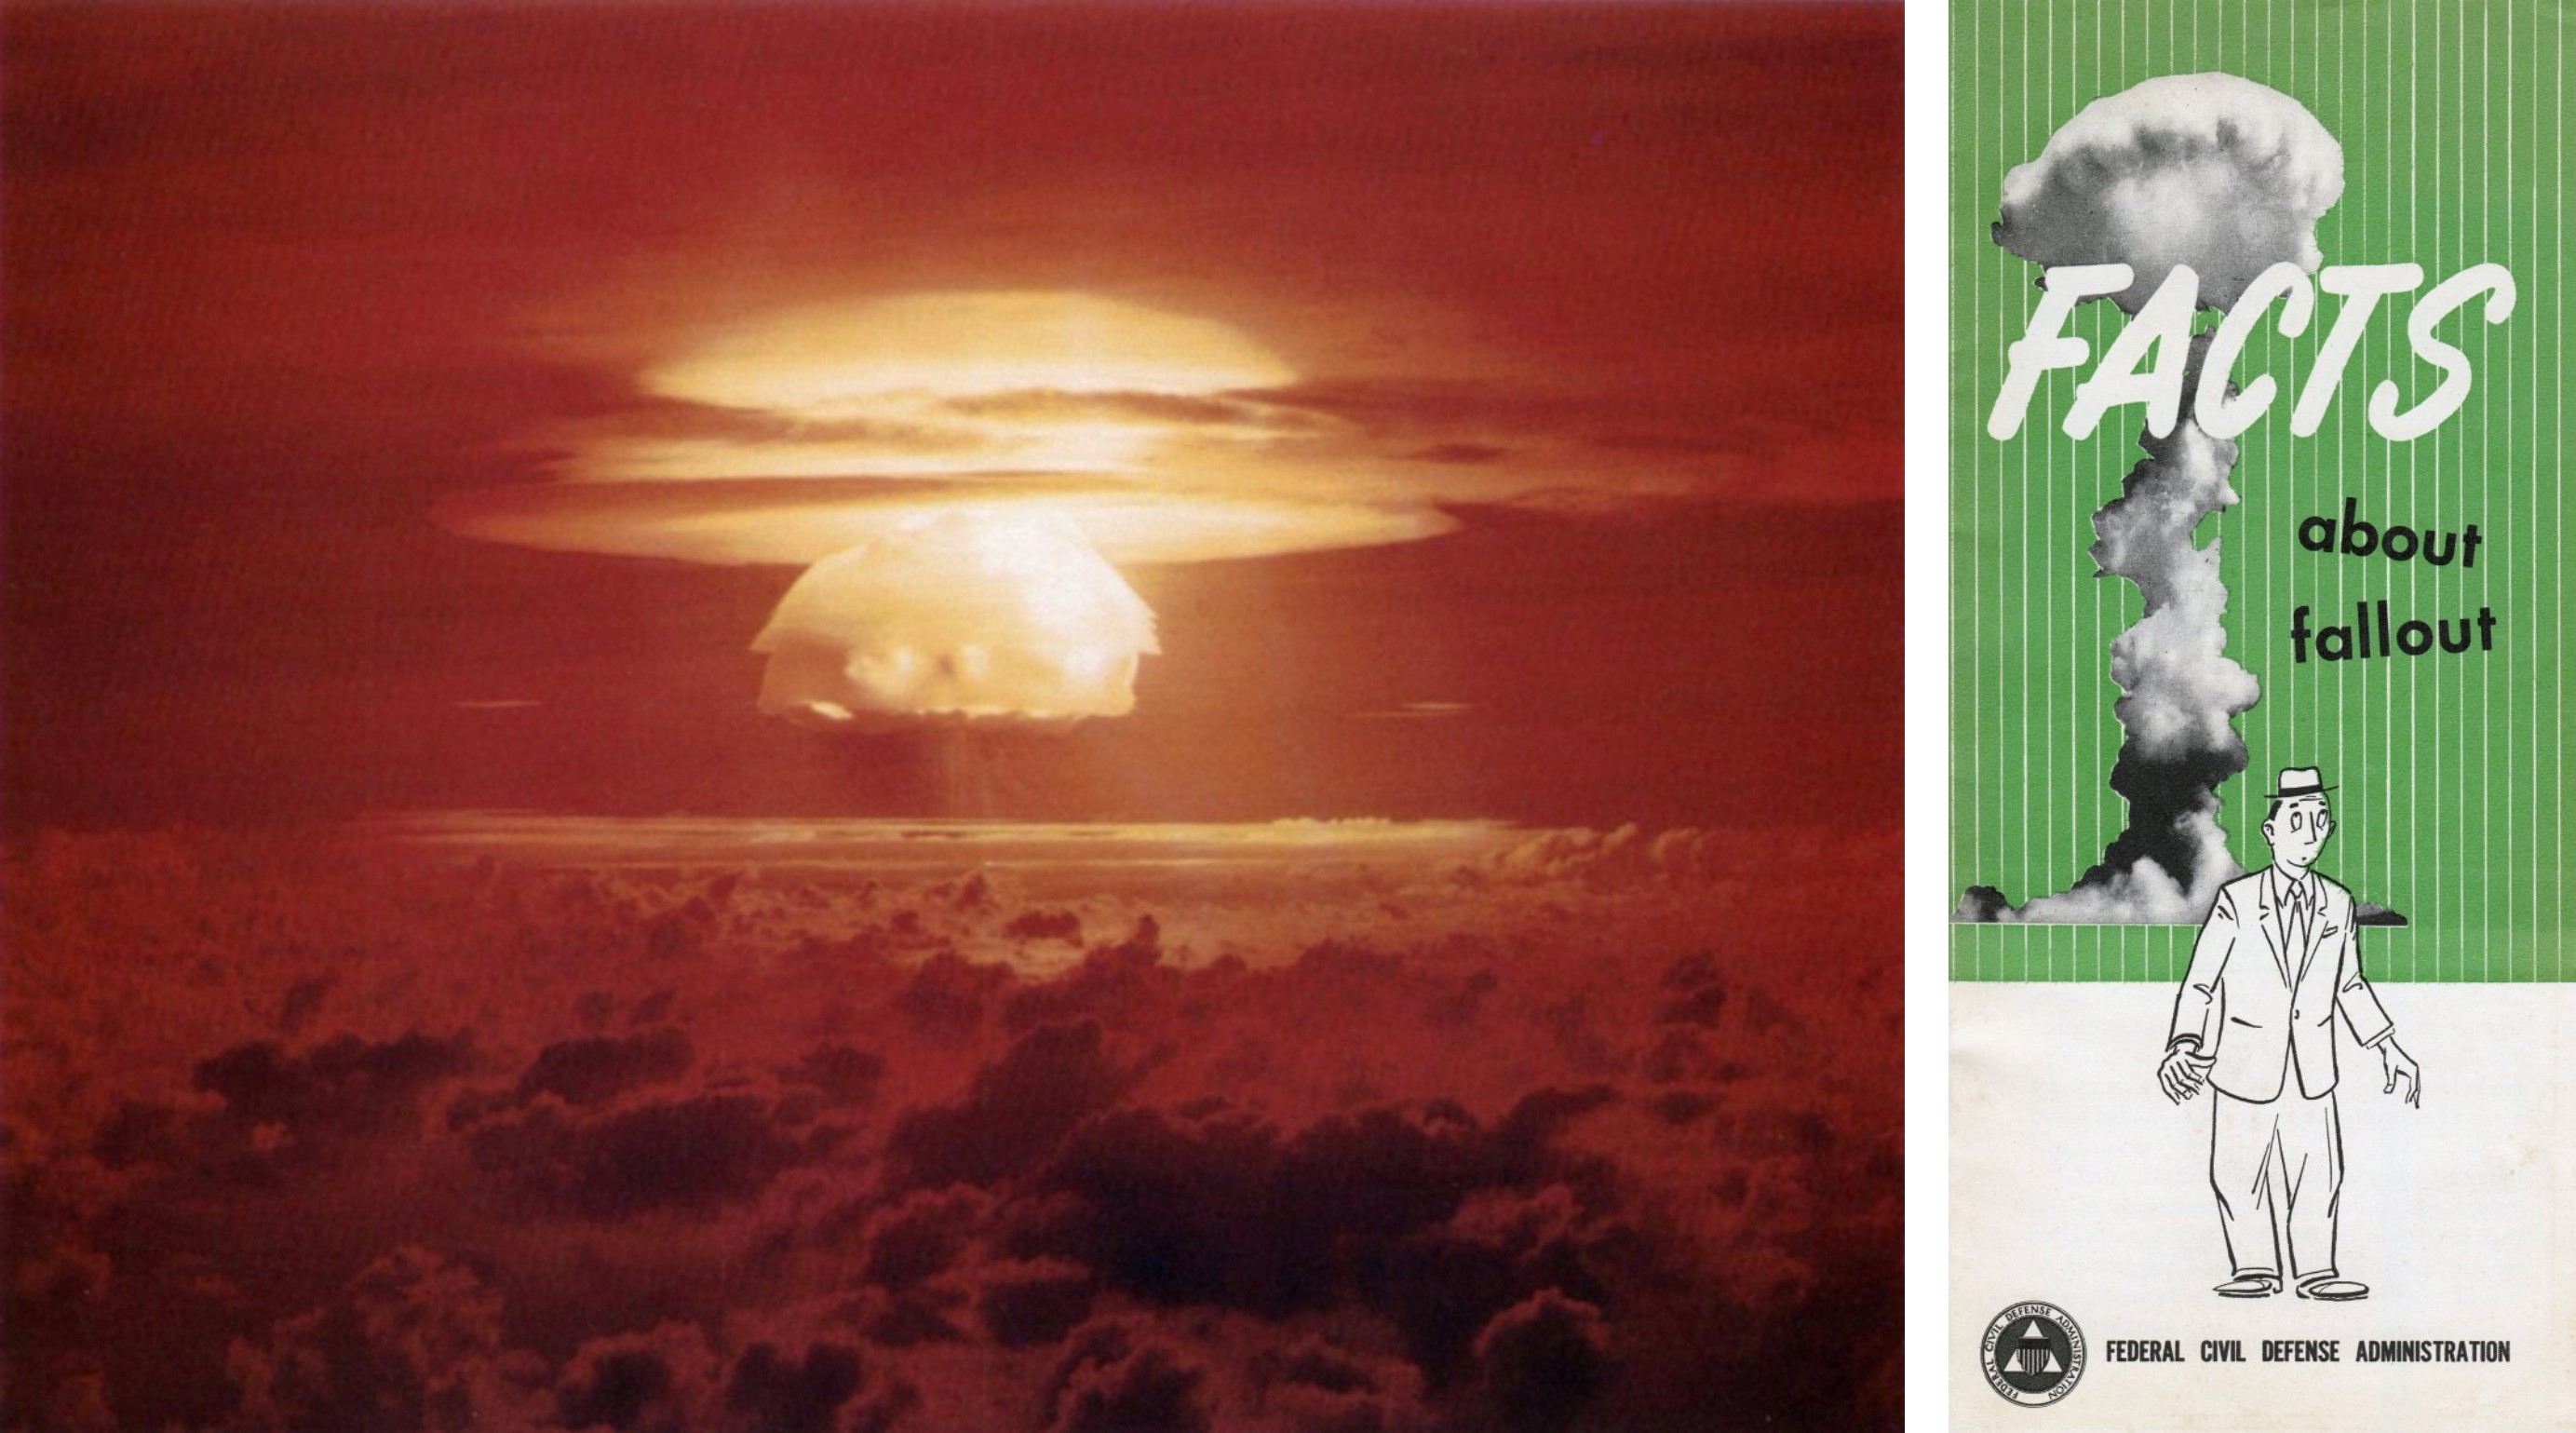 On the left, the detonation of the Castle Bravo thermonuclear bomb. On the right, the informational survival pamphlet 'Facts about Fallout.'